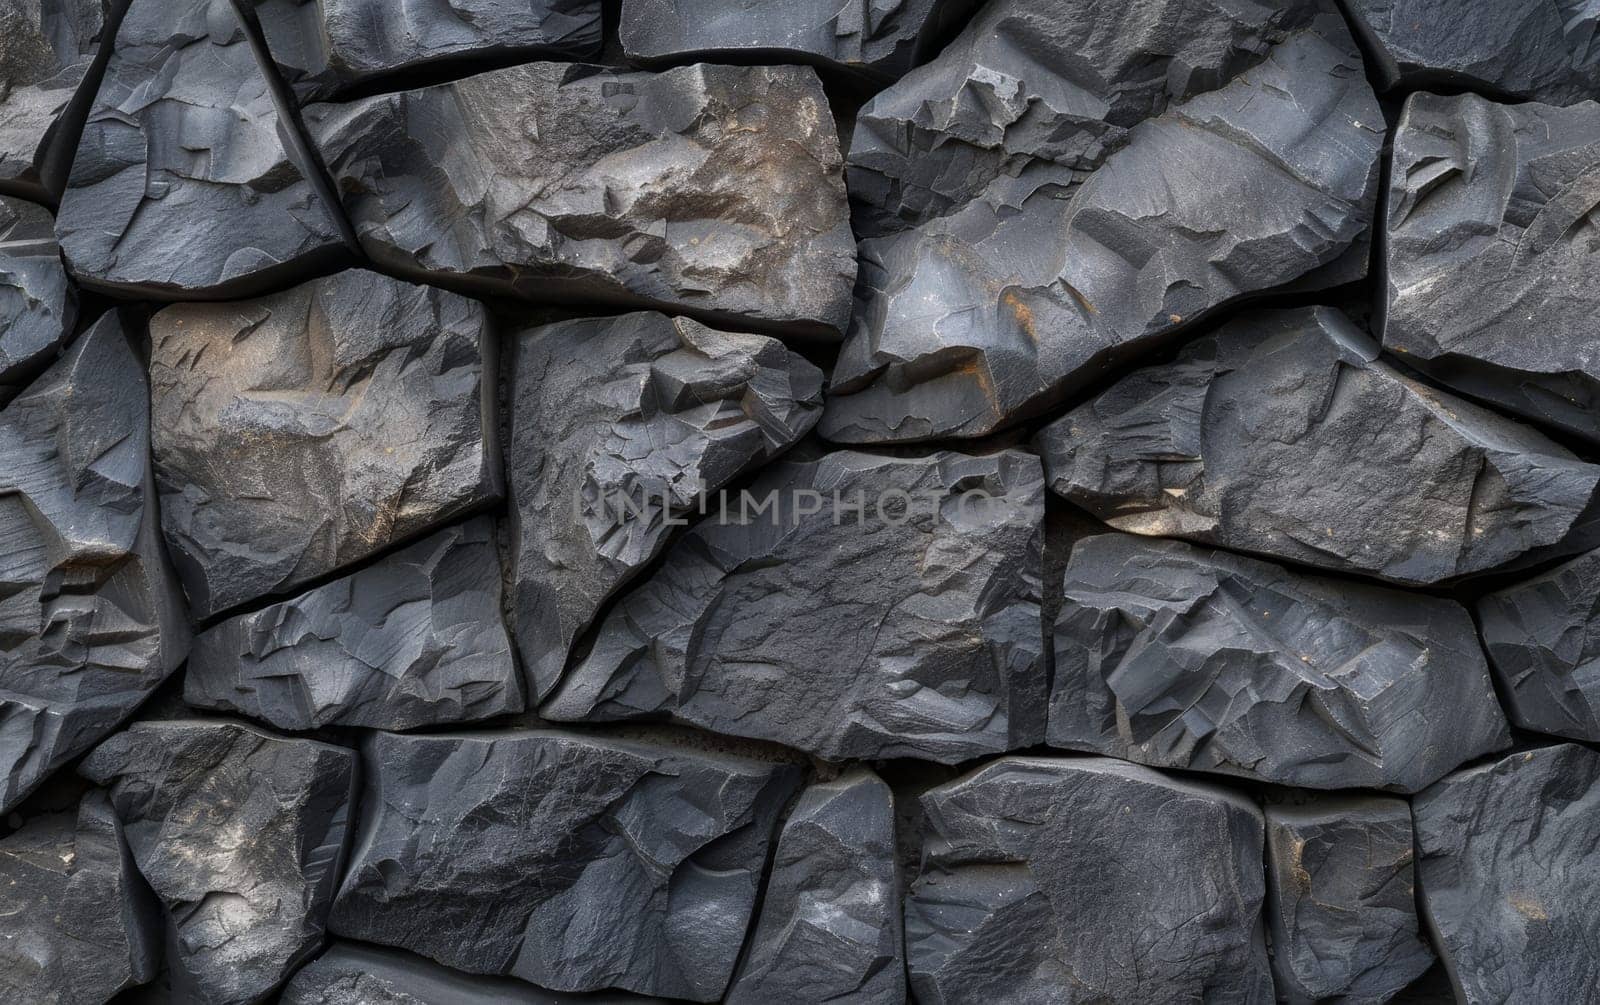 Close-up view of a pile of coal with a rough, irregular shape and texture. by sfinks